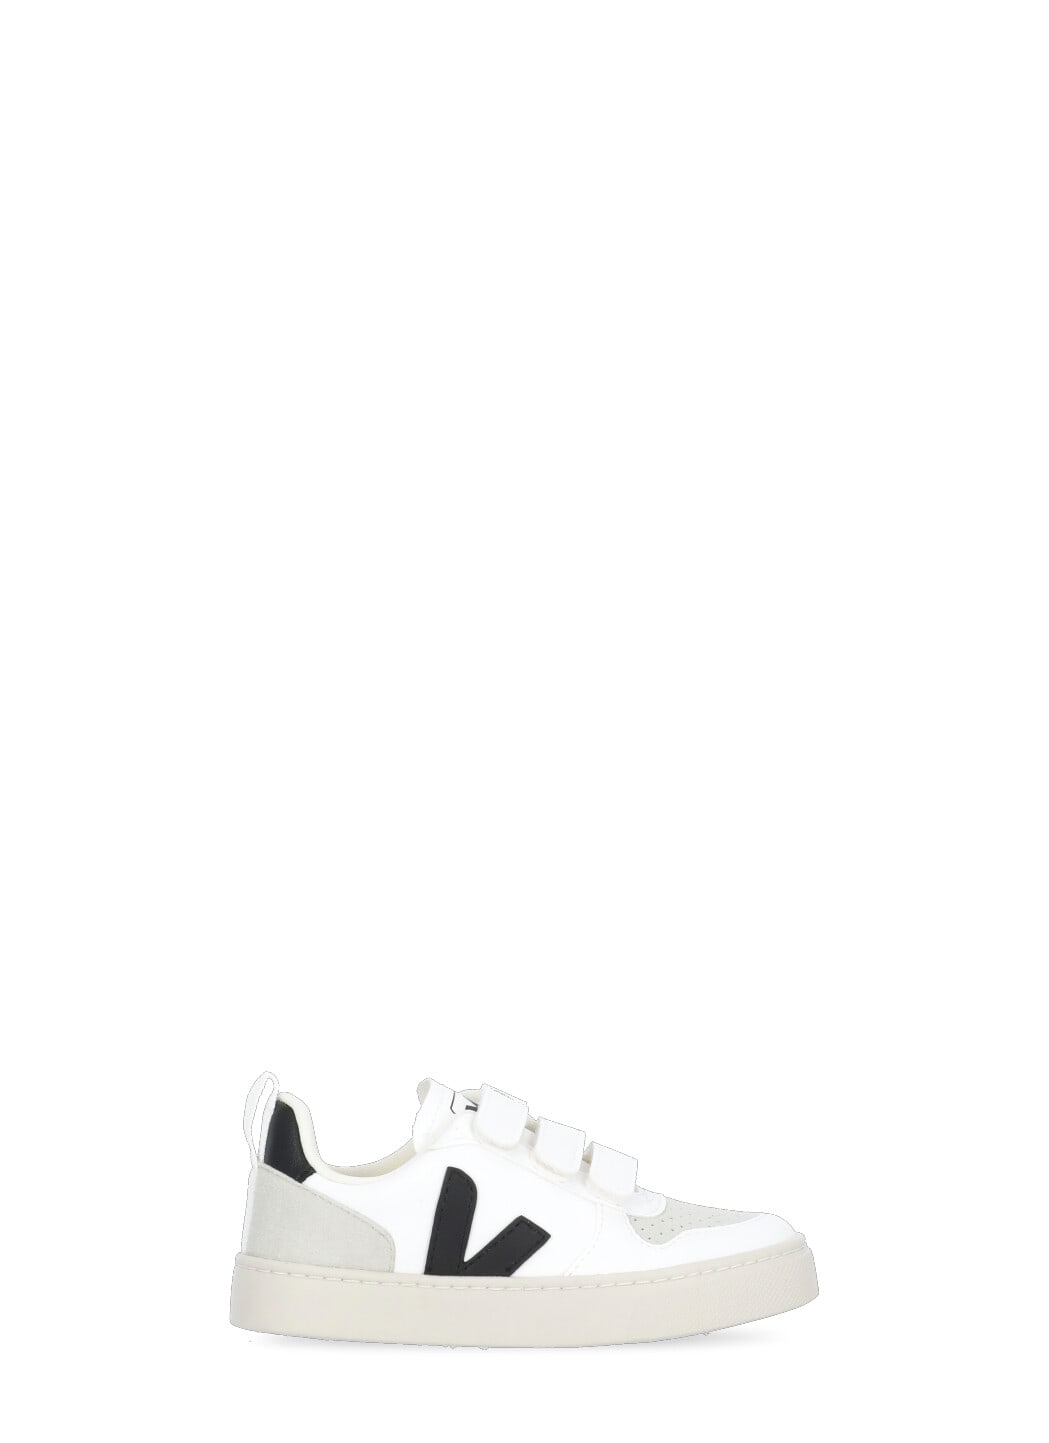 Veja Eco Leather Sneakers